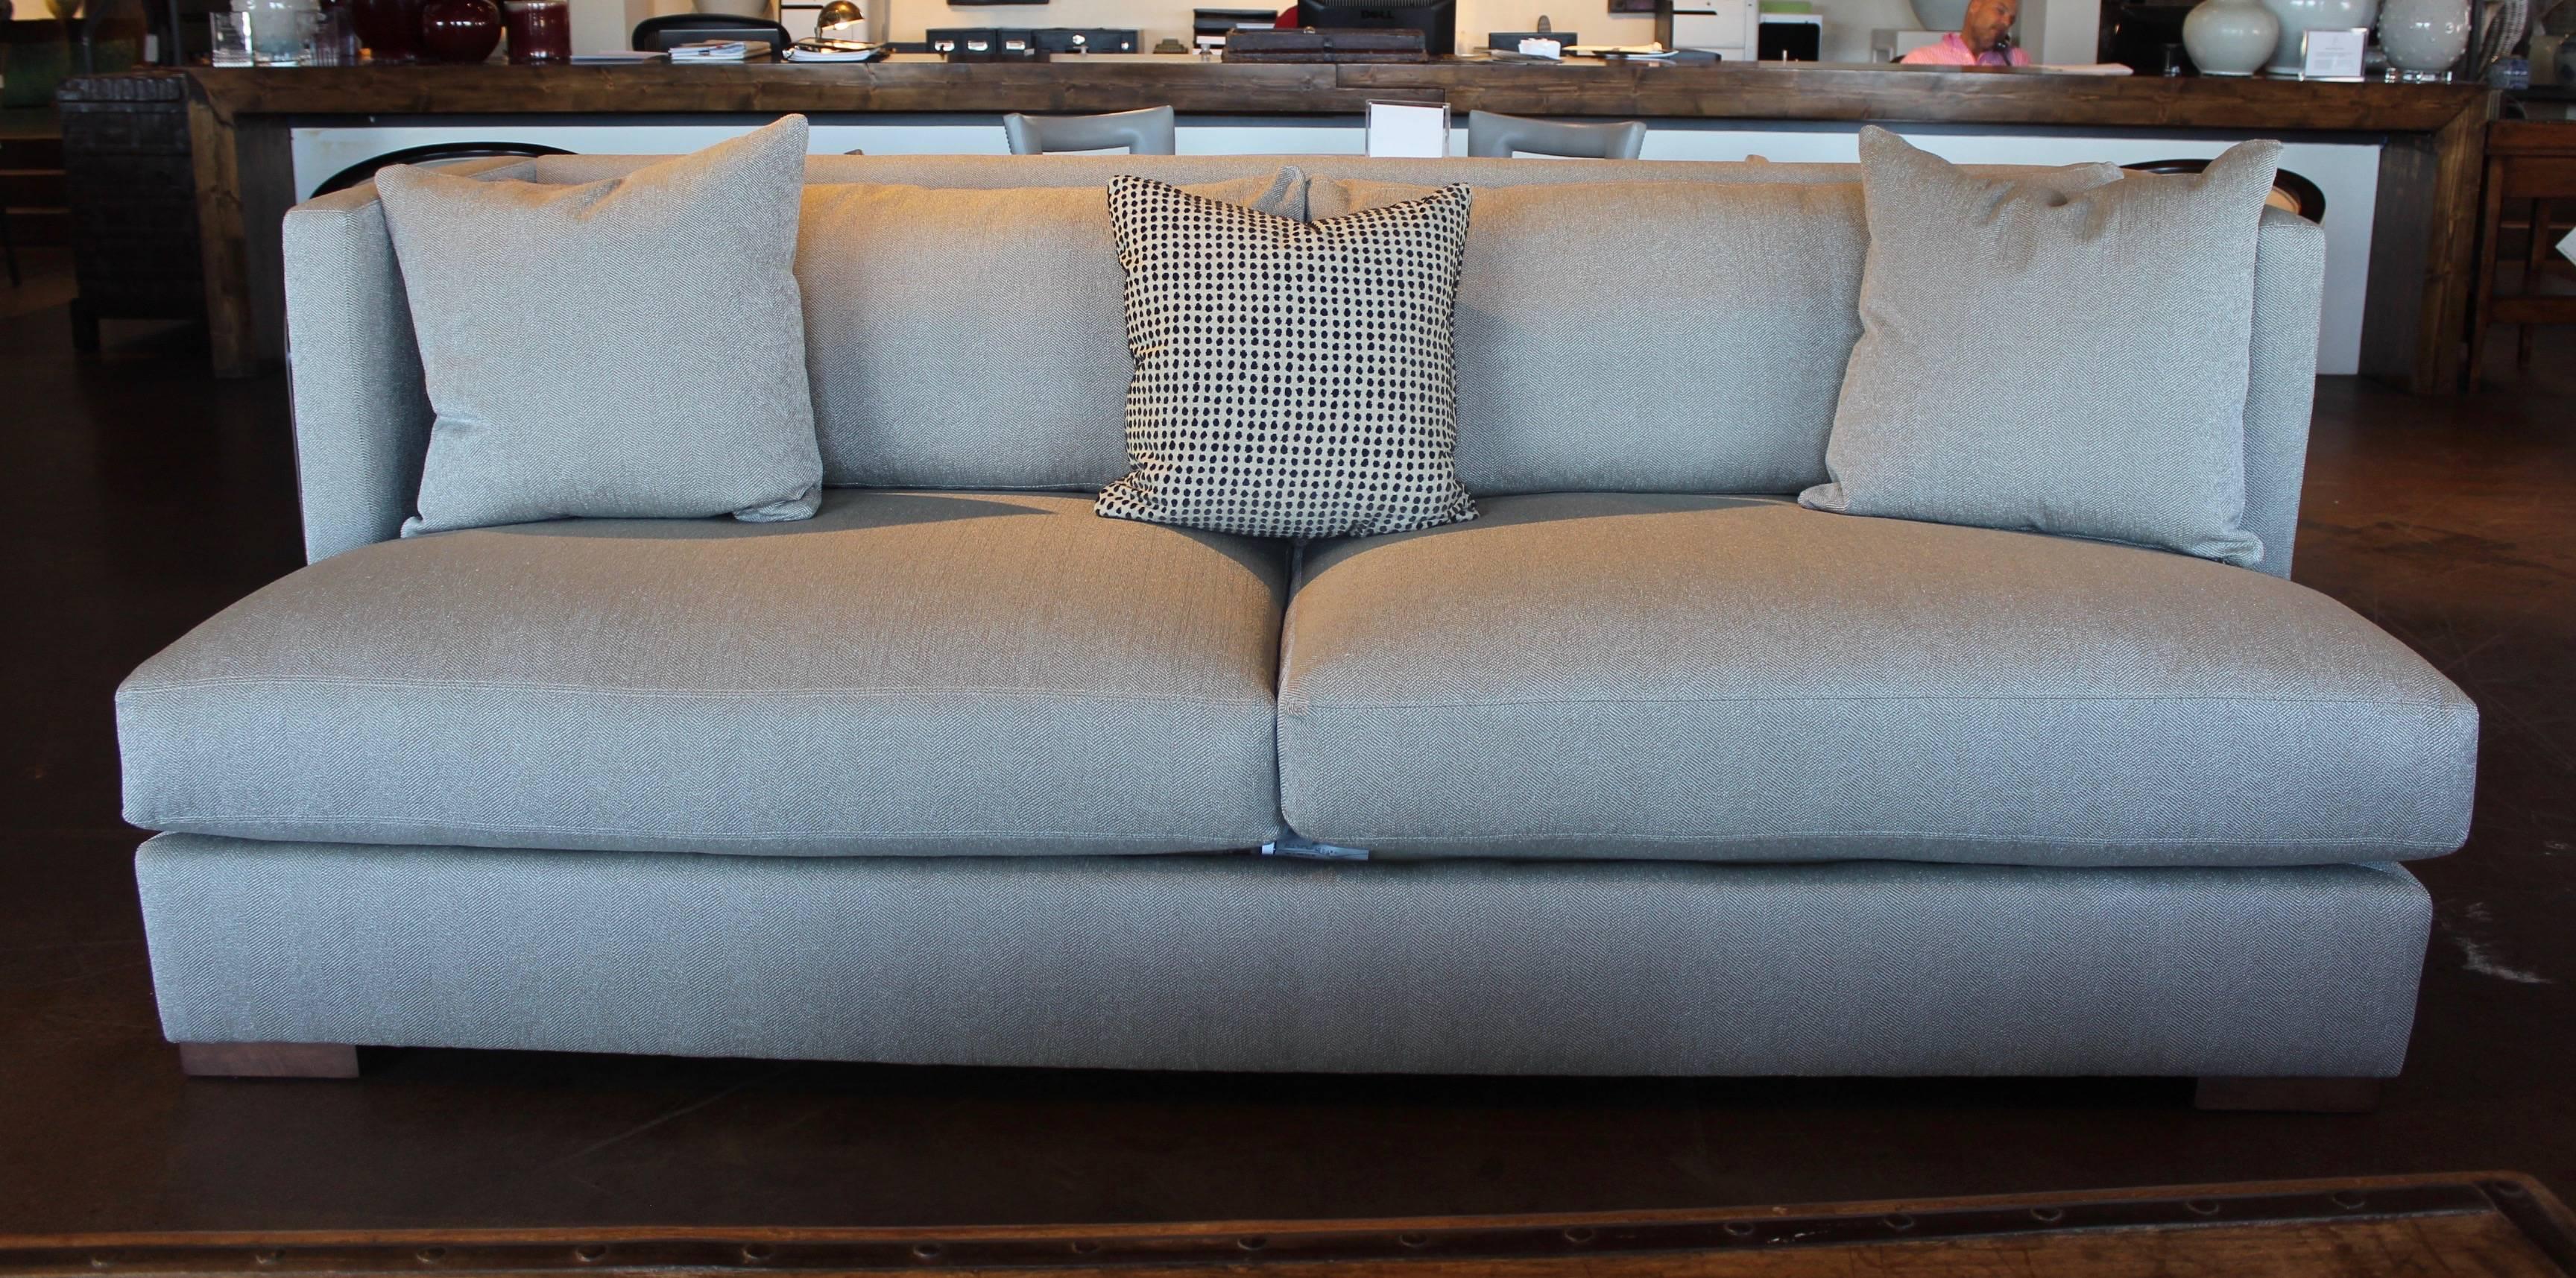 Modern high back grey sofa.
Brand: LEE.
Fabric is Hayes Pewter.
Cloud nine filling.
Light walnut legs. 

Overall measurement: 96' W X 44